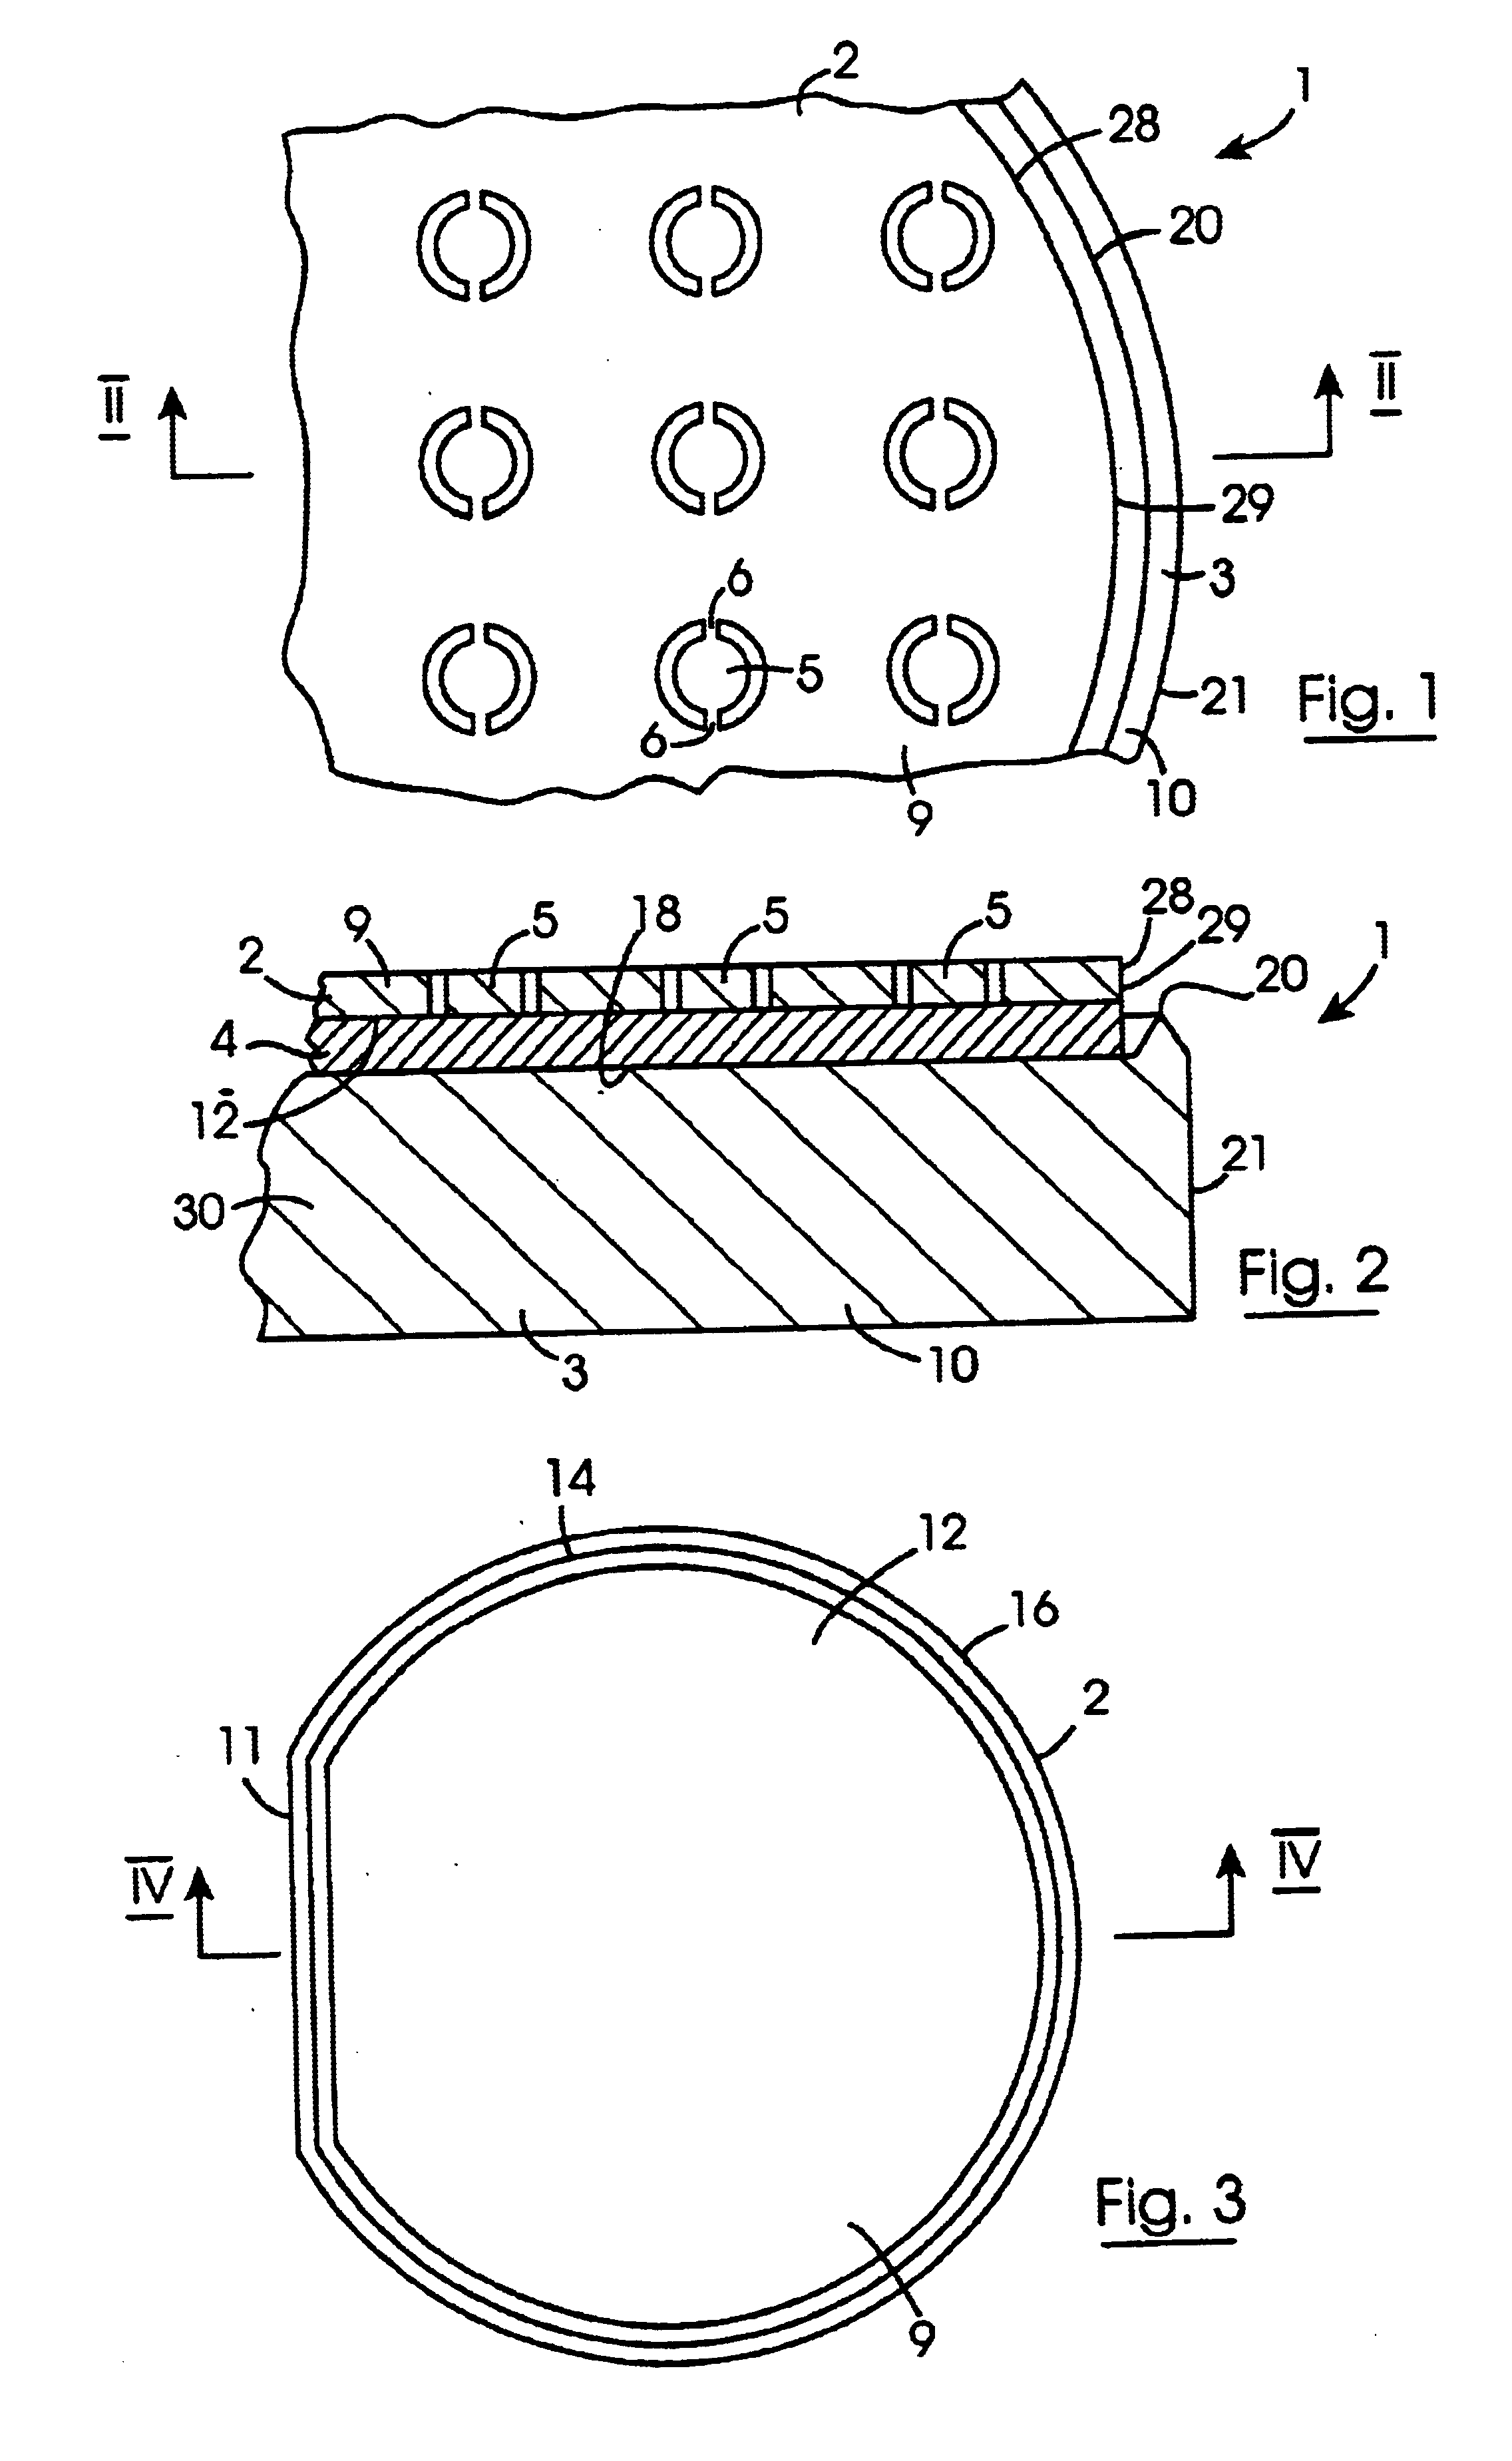 Composite semiconductor wafer and a method for forming the composite semiconductor wafer